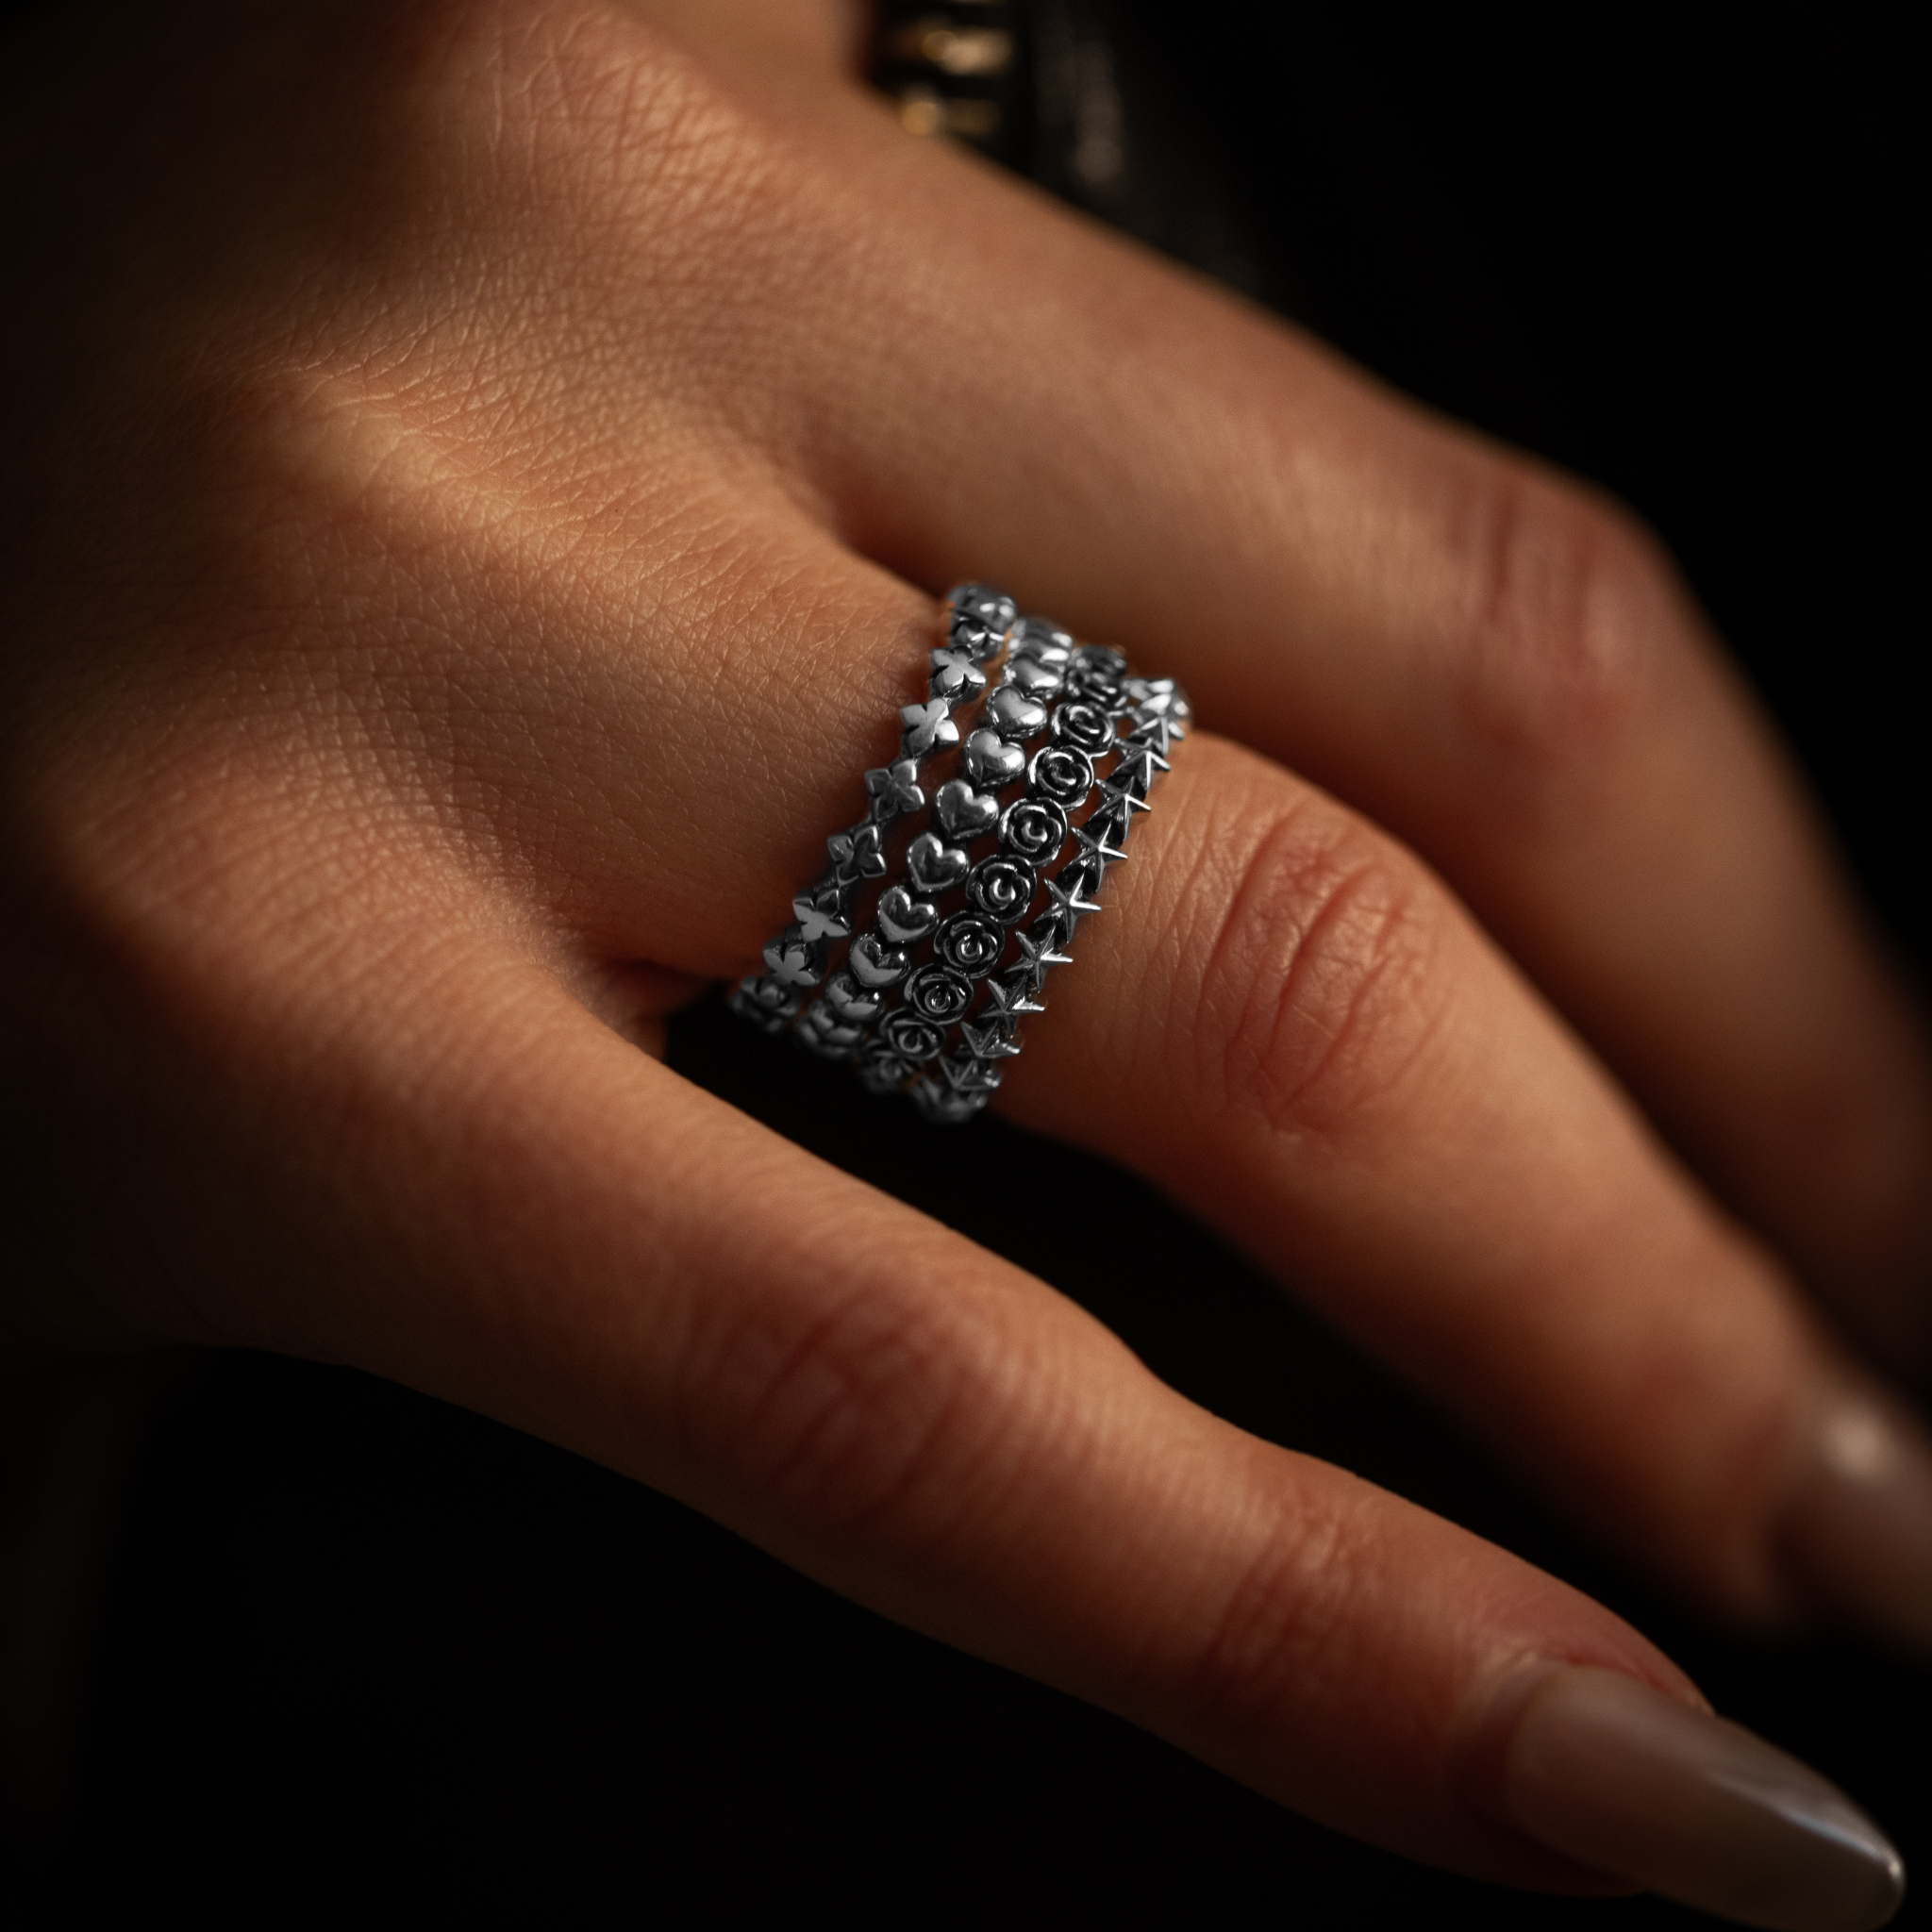 all styles of micro stackable rings - mb cross, heart, rose and star - stacked on finger